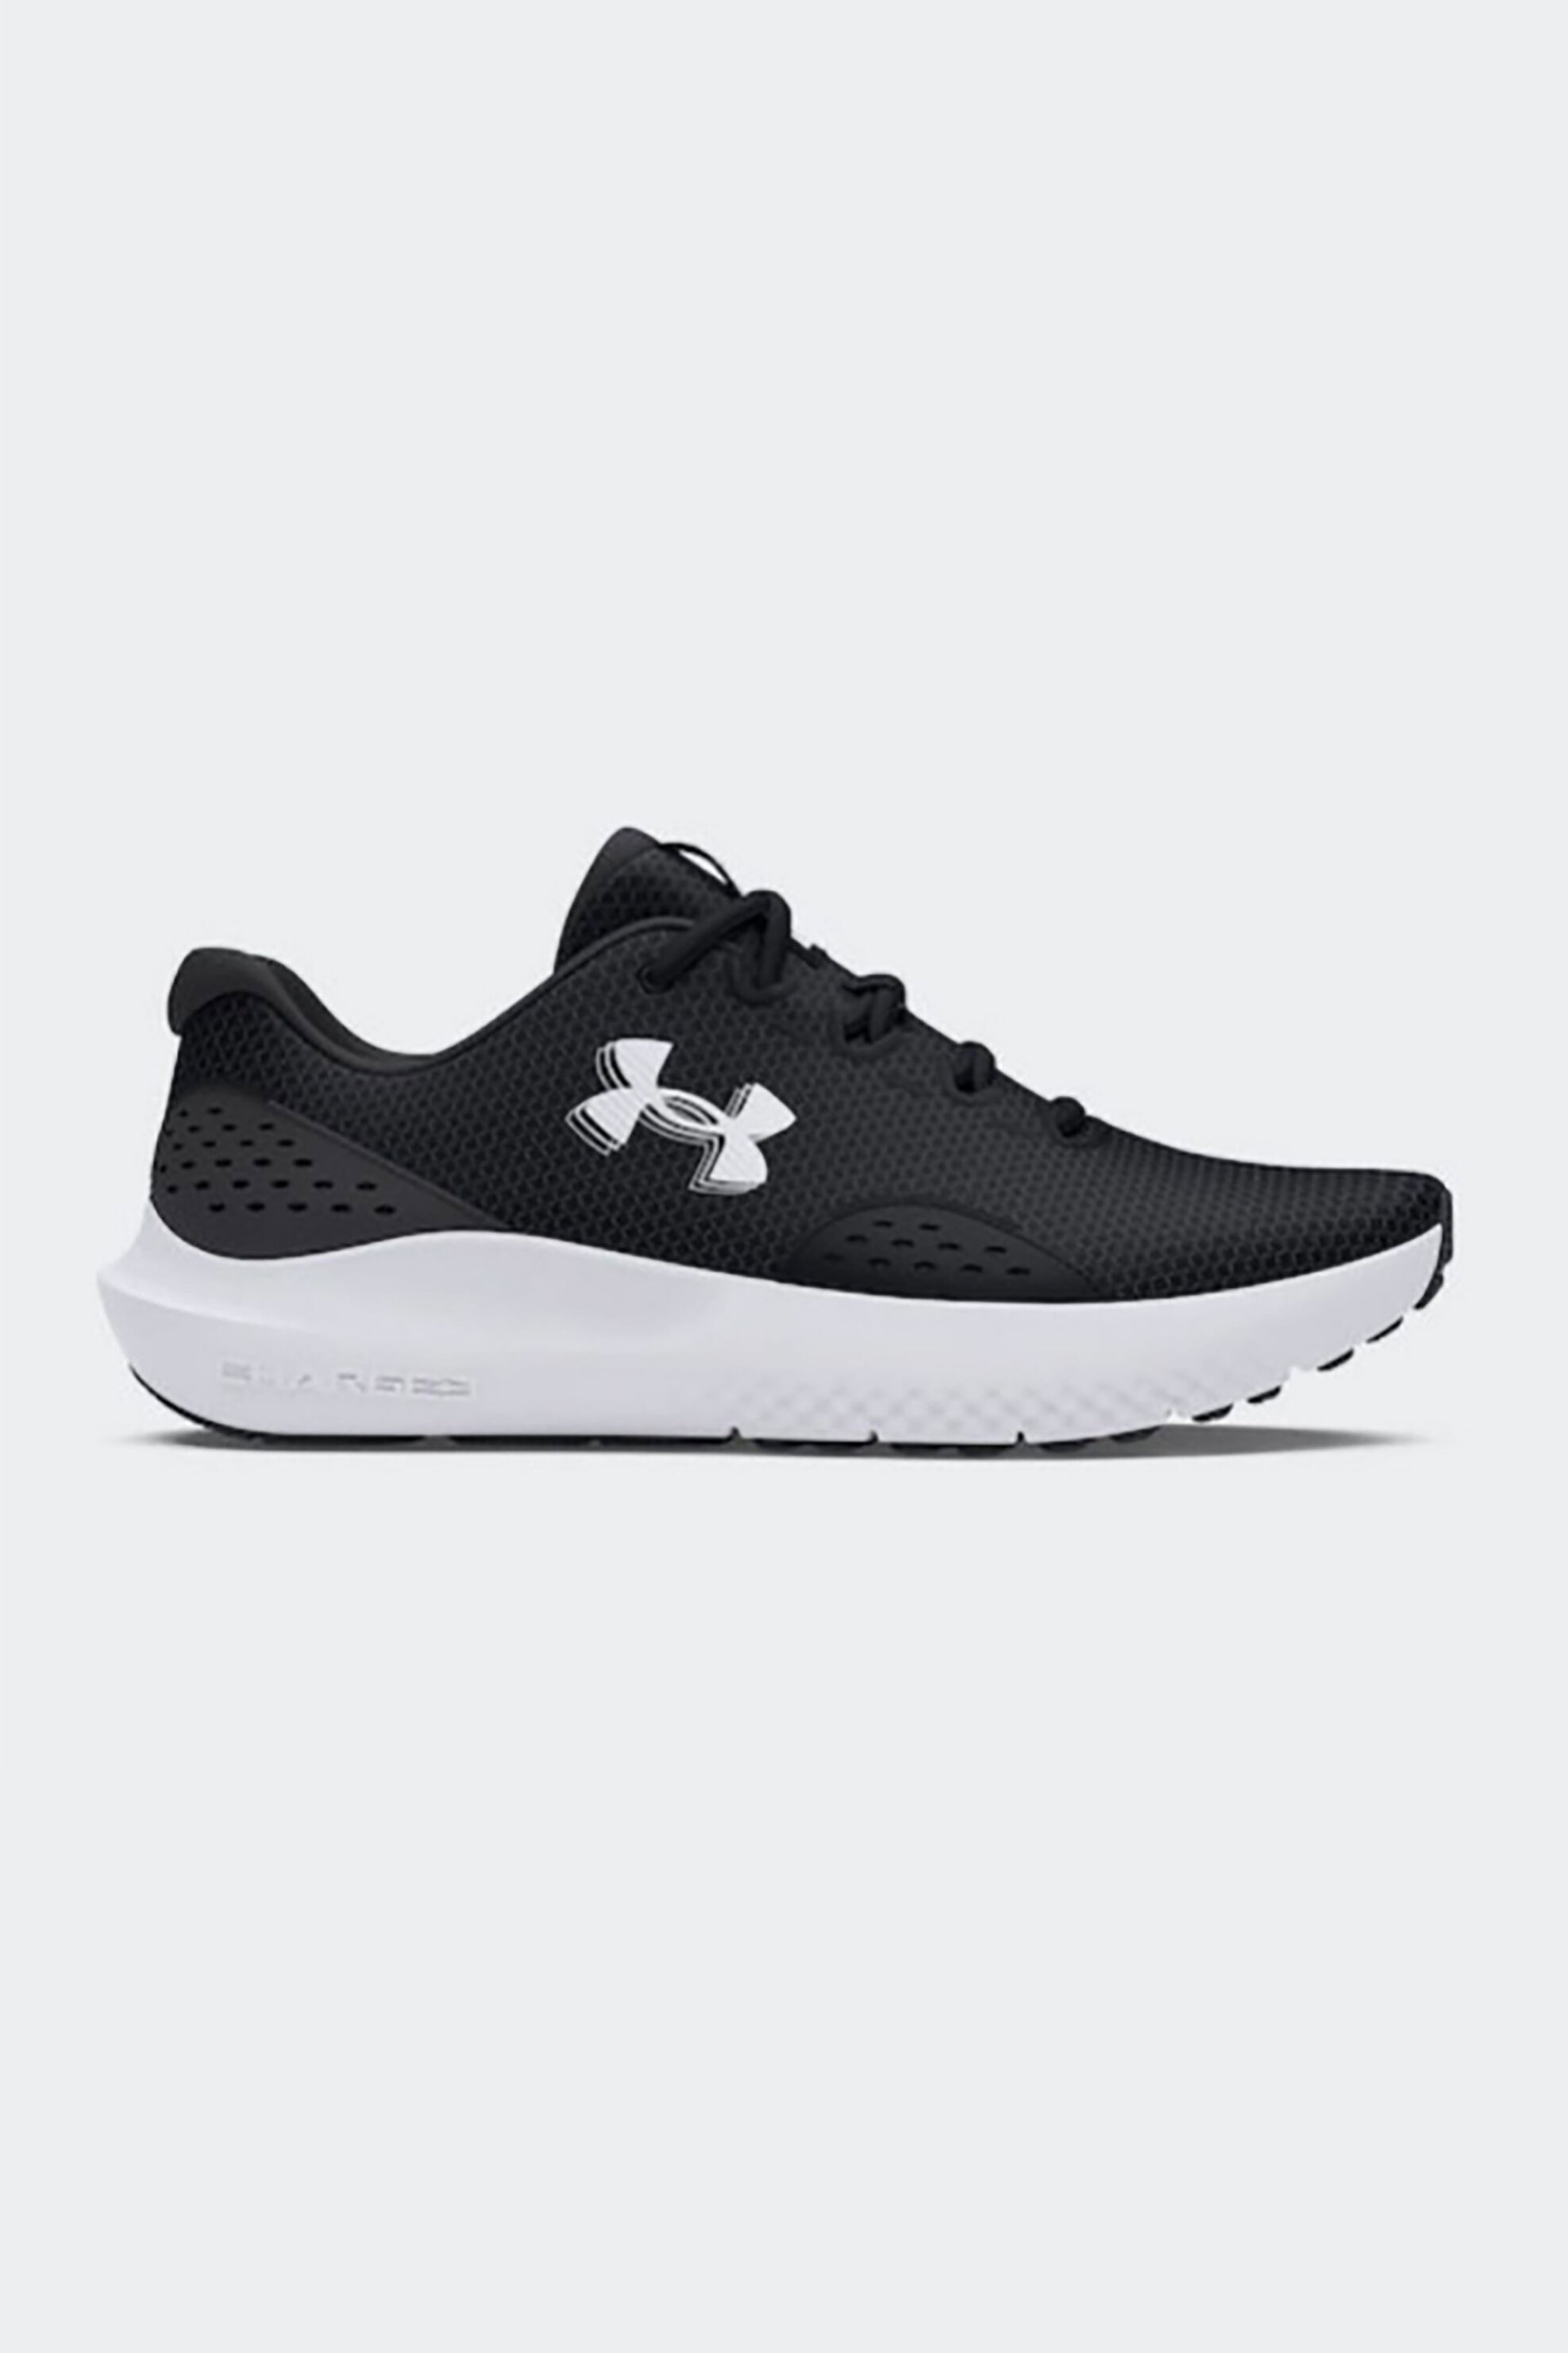 Under Armour ανδρικά αθλητικά παπούτσια running “Charged Surge 4” – 3027000 Ασπρόμαυρο